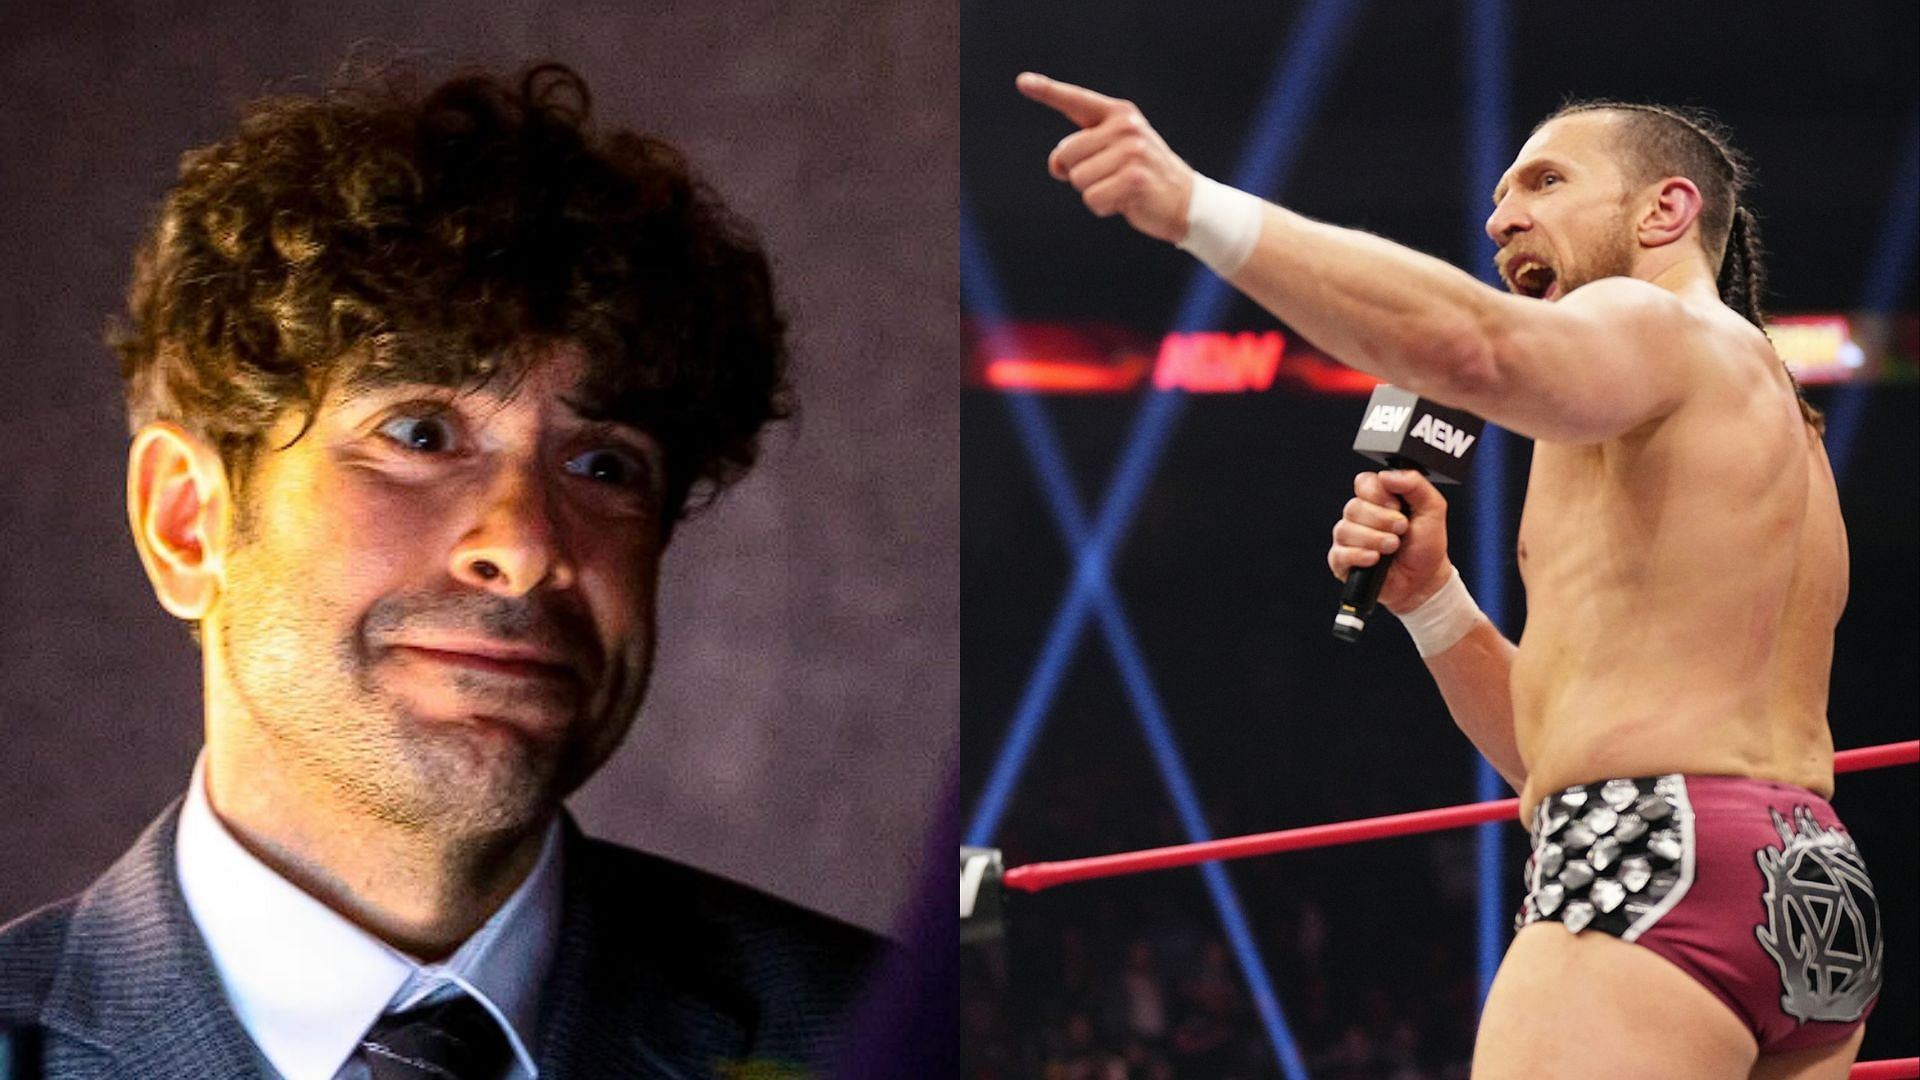 Bryan Danielson is a WWE Grand Slam Champion who is now with AEW and Tony Khan is the promotion